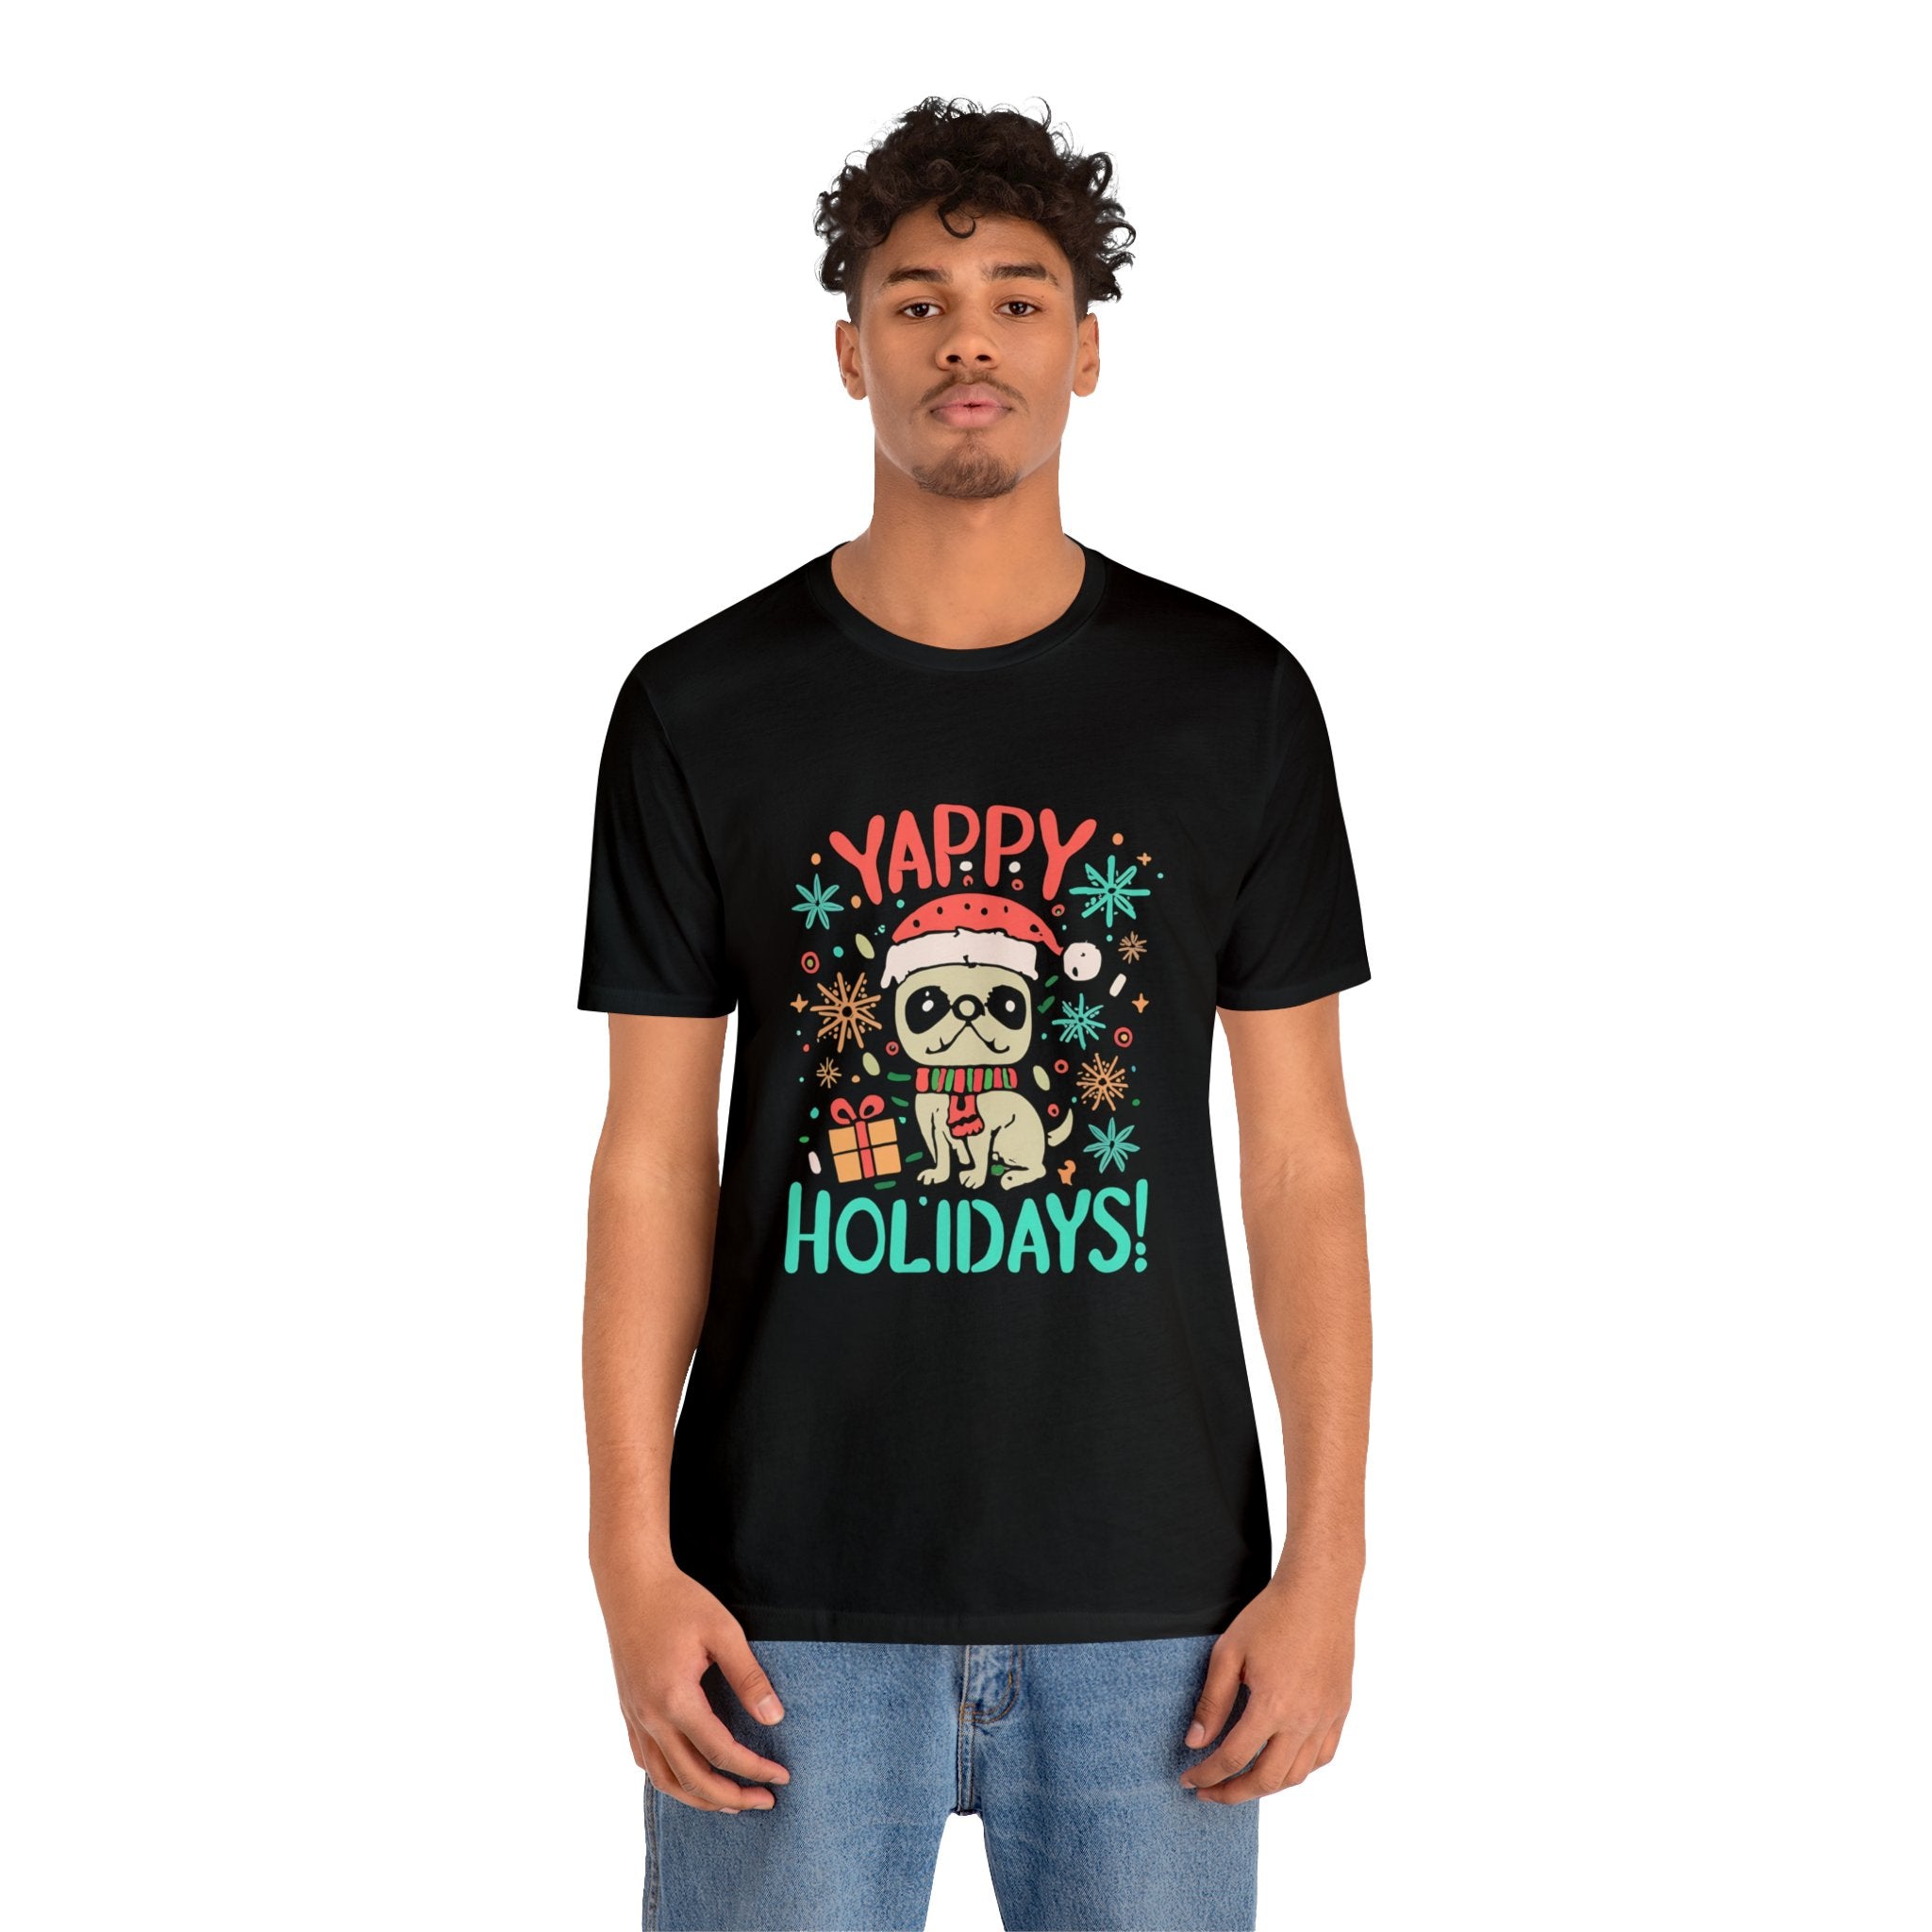 Yappy Holidays Christmas T-shirt For Dog Owners